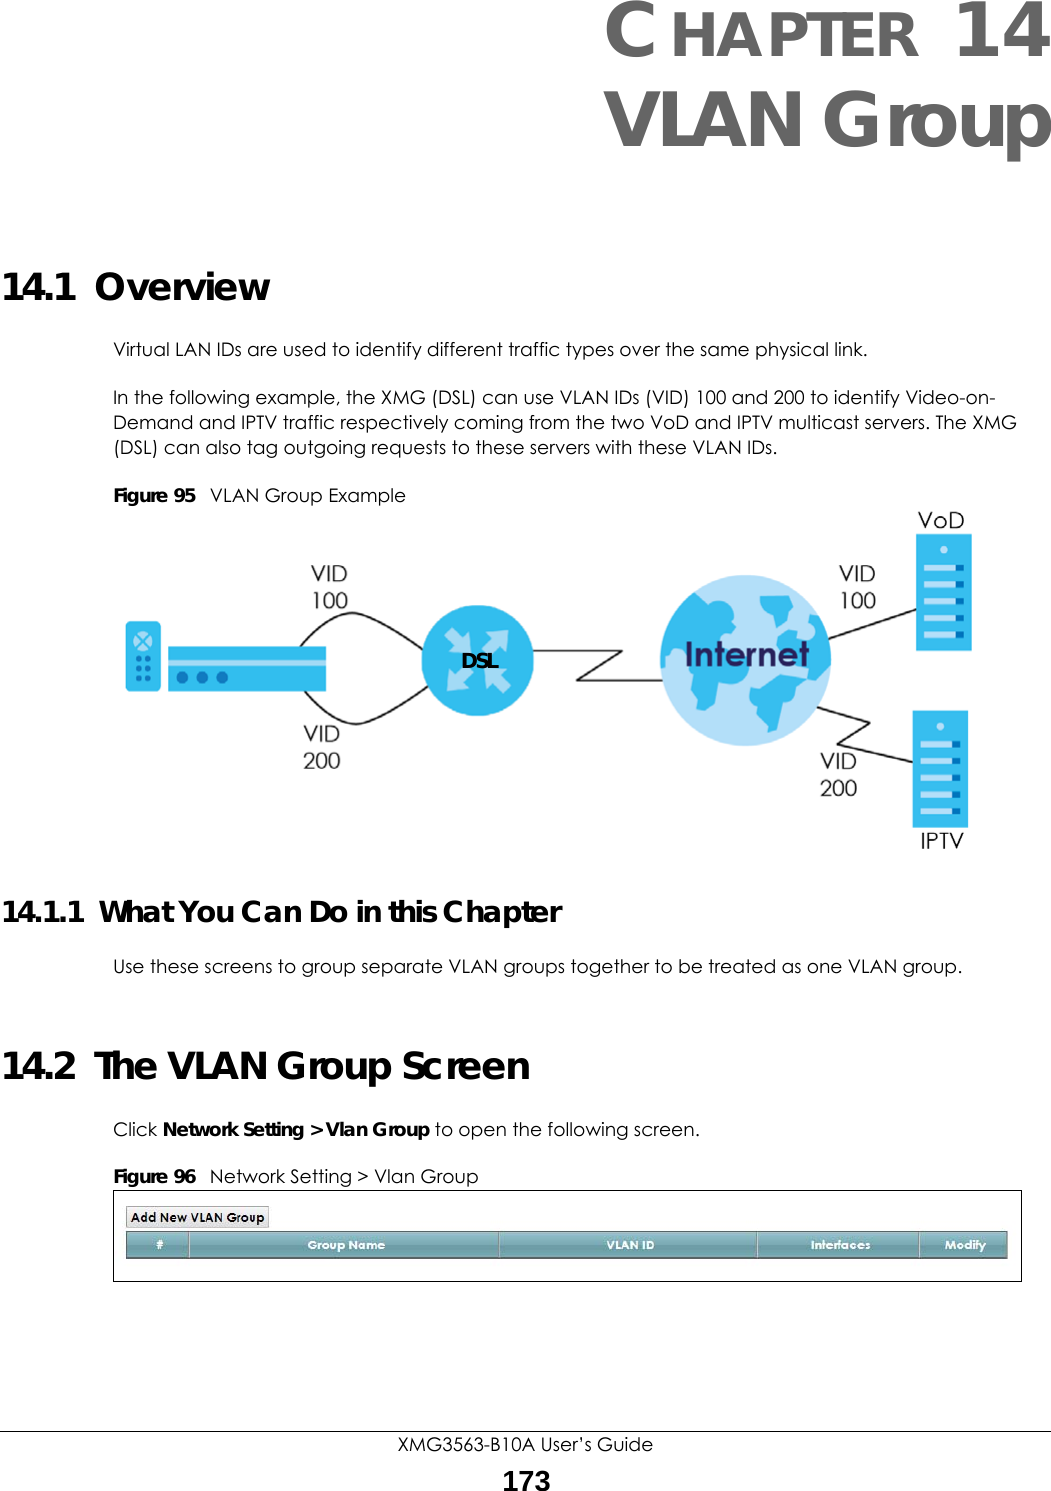 XMG3563-B10A User’s Guide173CHAPTER 14VLAN Group14.1  OverviewVirtual LAN IDs are used to identify different traffic types over the same physical link.In the following example, the XMG (DSL) can use VLAN IDs (VID) 100 and 200 to identify Video-on-Demand and IPTV traffic respectively coming from the two VoD and IPTV multicast servers. The XMG (DSL) can also tag outgoing requests to these servers with these VLAN IDs.Figure 95   VLAN Group Example14.1.1  What You Can Do in this ChapterUse these screens to group separate VLAN groups together to be treated as one VLAN group.14.2  The VLAN Group ScreenClick Network Setting &gt; Vlan Group to open the following screen. Figure 96   Network Setting &gt; Vlan Group DSL